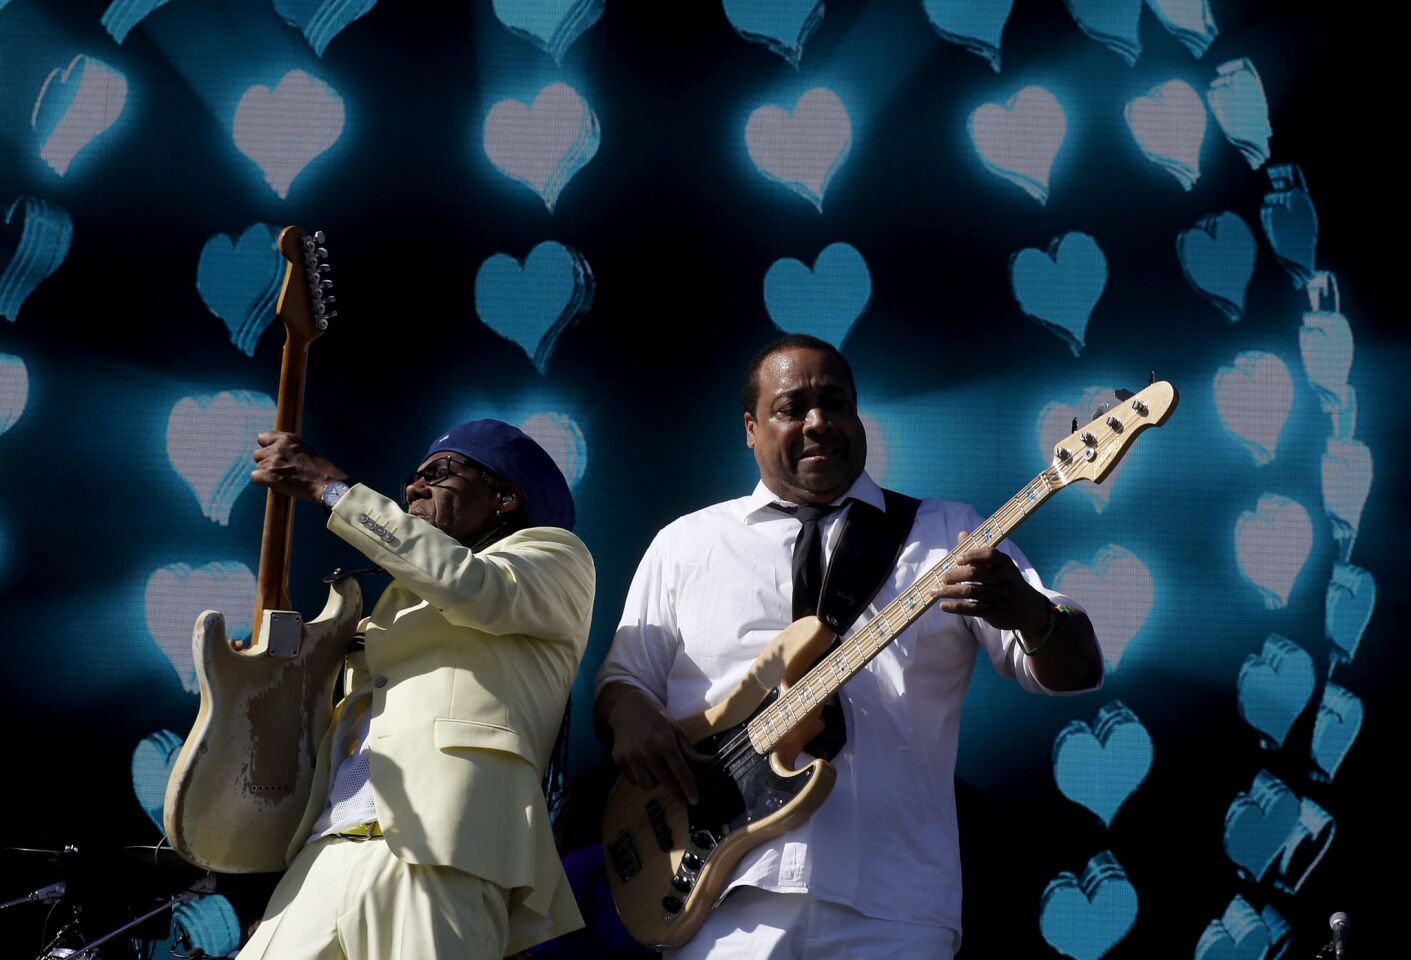 Nile Rodgers, left, and bassist Jerry Barnes perform with CHIC during the Coachella Music and Arts Festival in Indio on April 14.